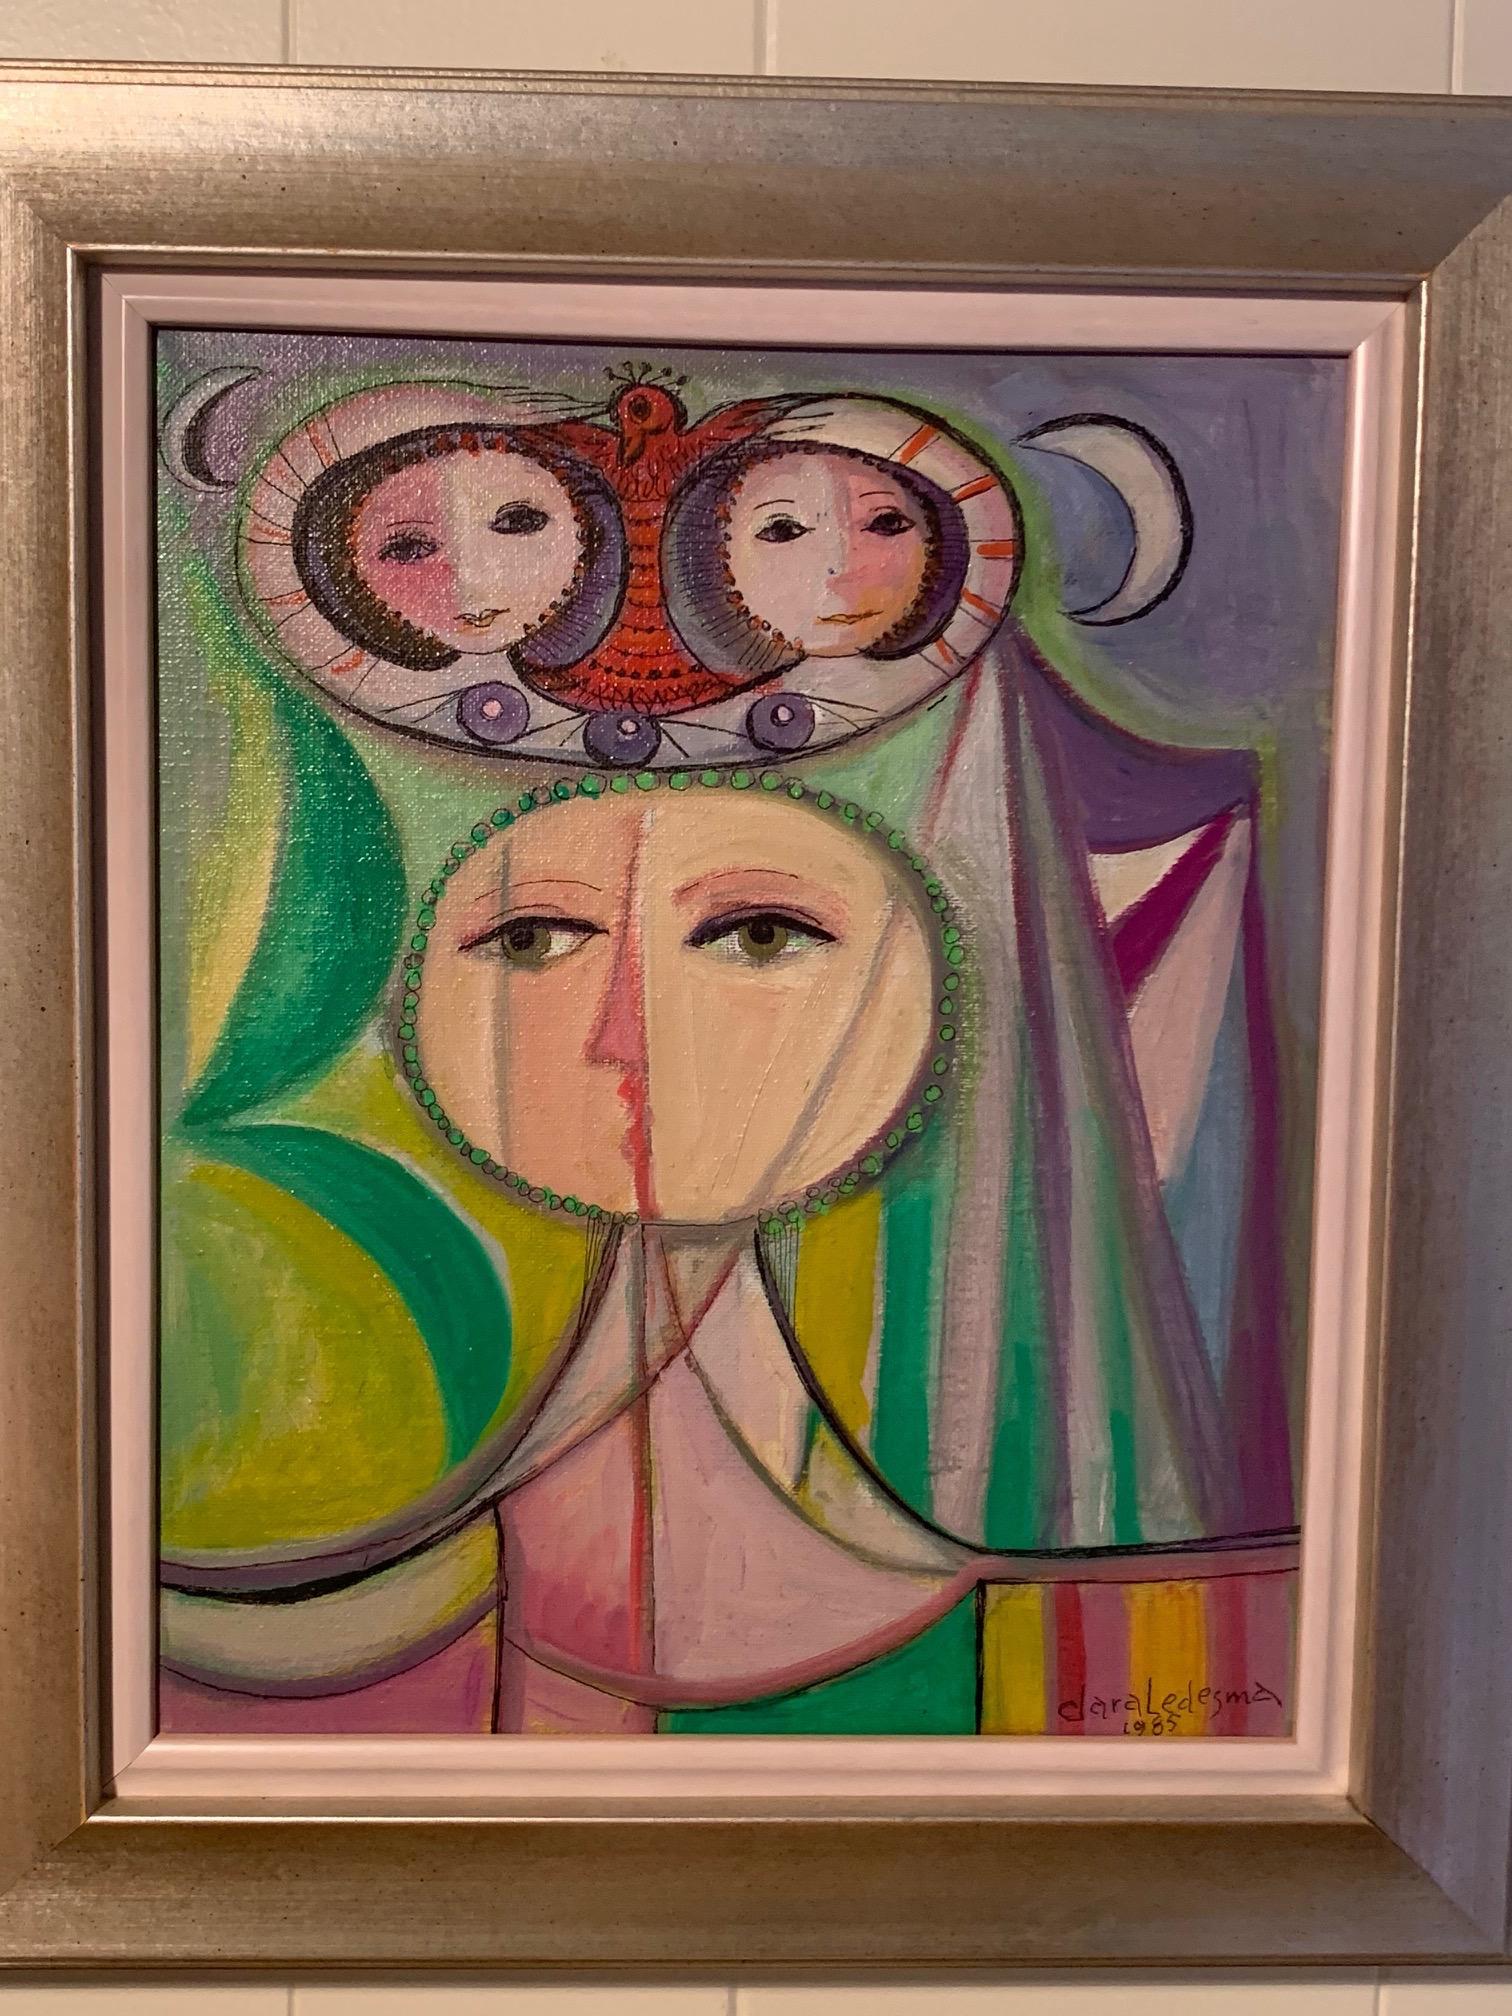 Lovely original and signed 1985 oil painting by the highly regarded, New York City based Dominican painter Clara Ledesma (1924-1999). Clara Ledesma is considered one of the founders of the modernist school of Dominican painting.... her influences